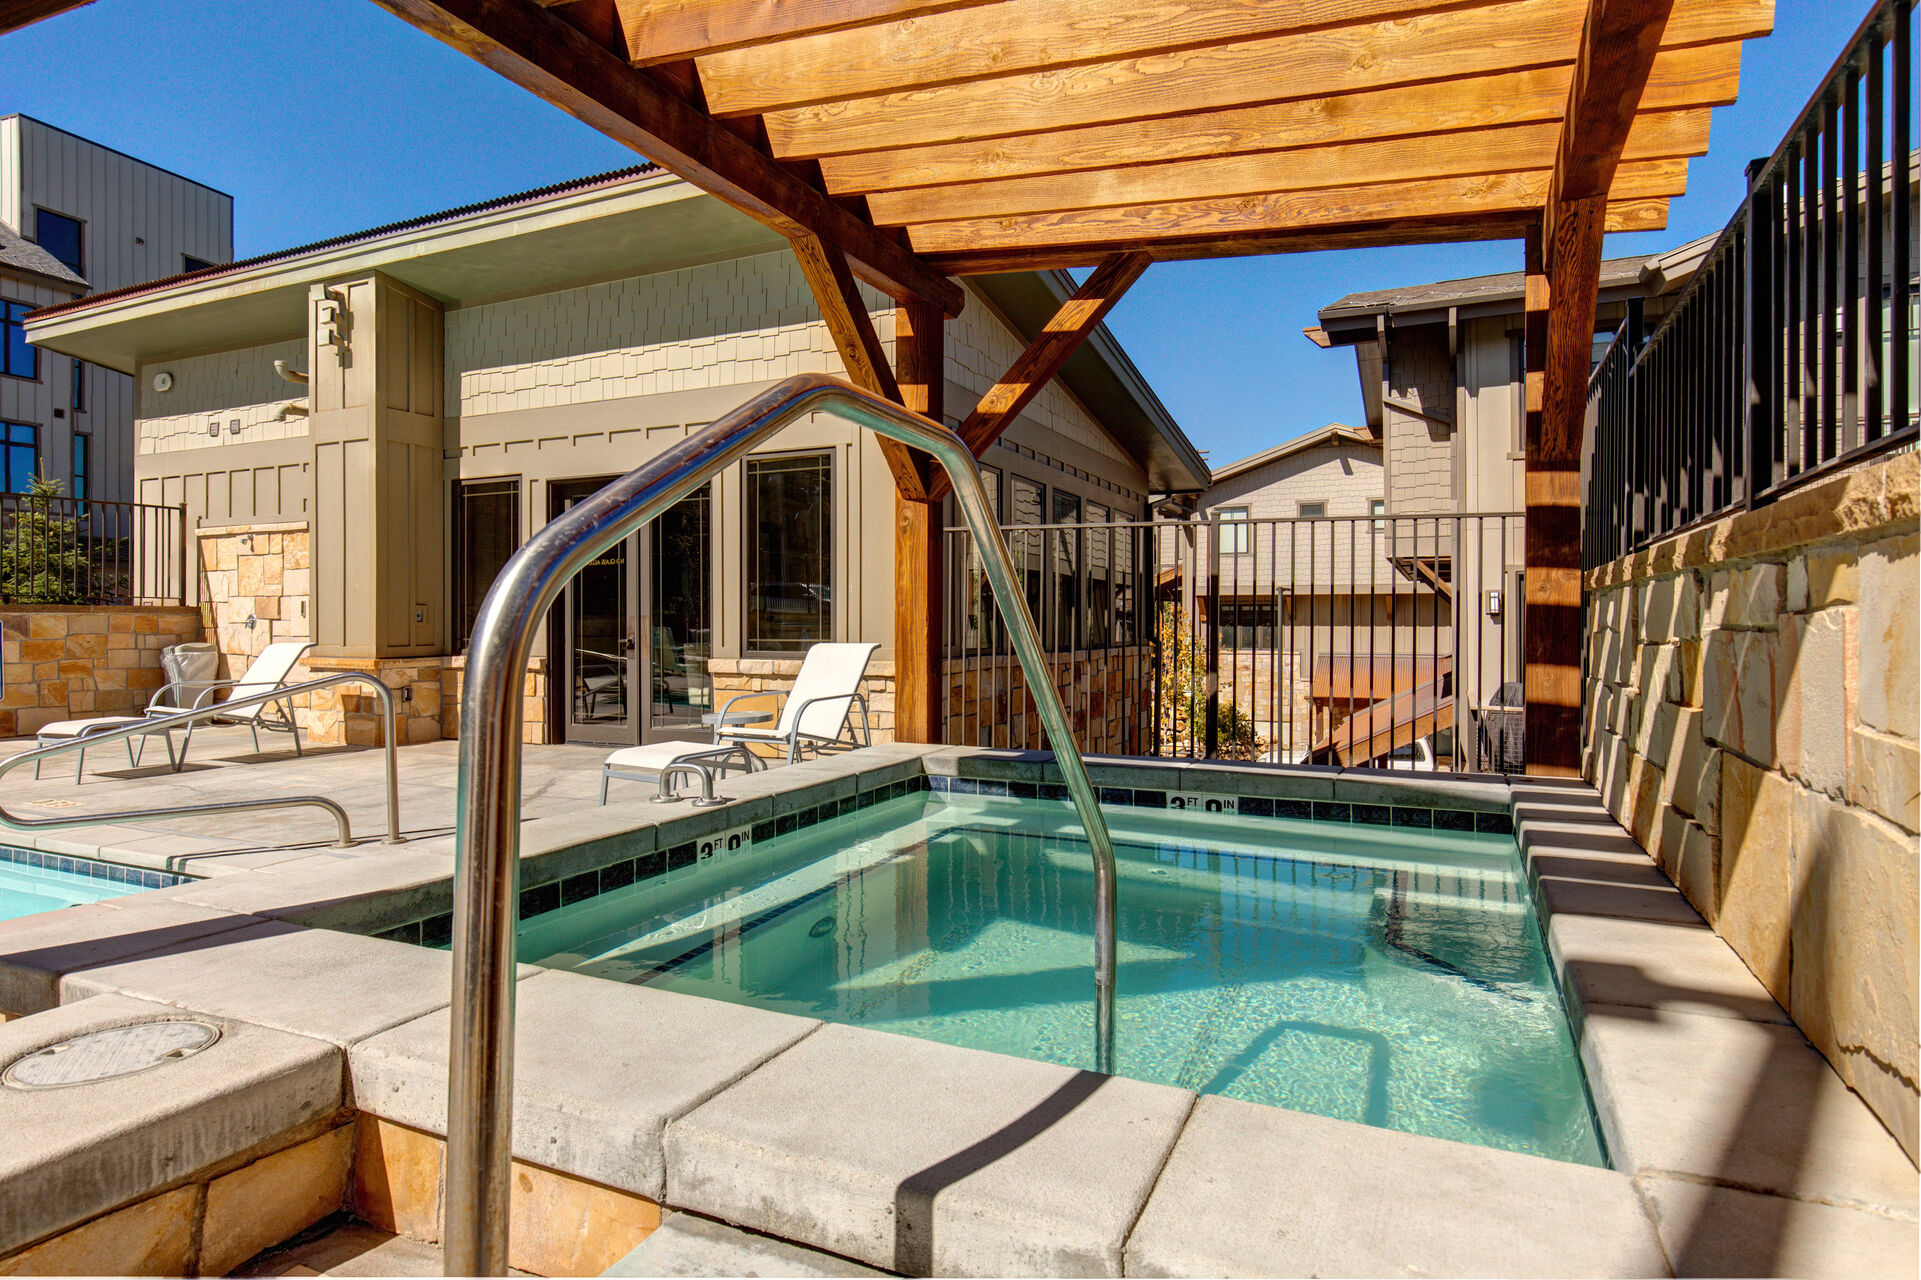 Blackstone Clubhouse with communal fitness center and year-round pool/hot tub